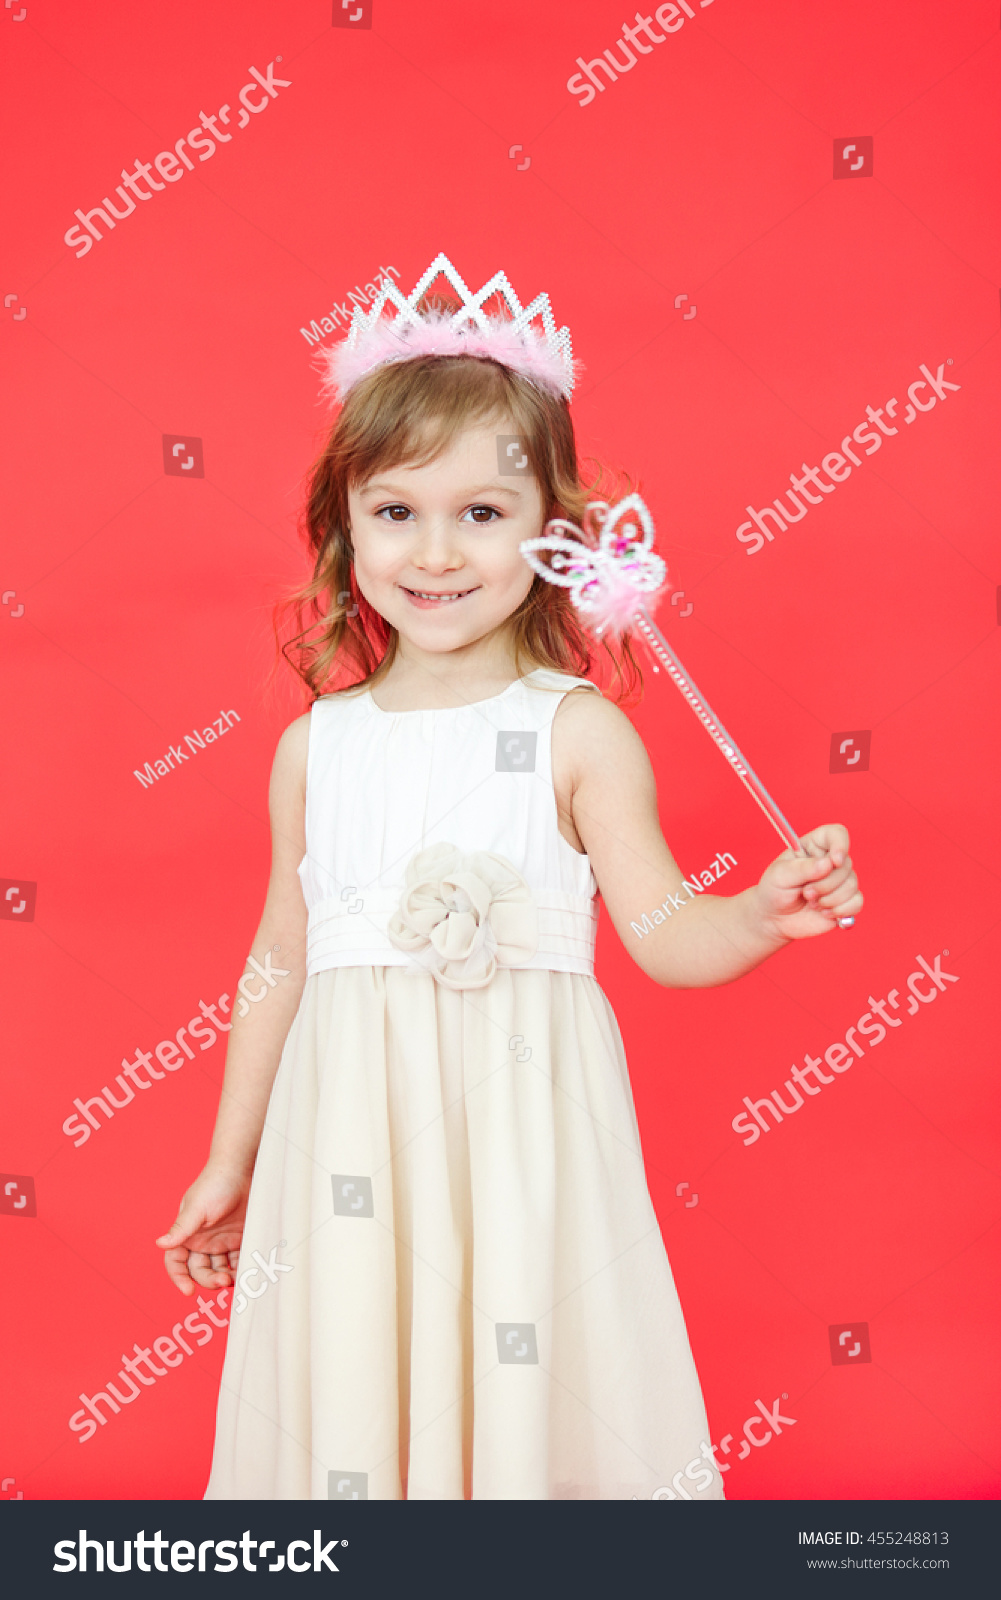 Vertical portrait of beautiful girl dressed in fairy isolated on red background. Cute little kid wearing a crown and white dress holding a magic wand. #455248813